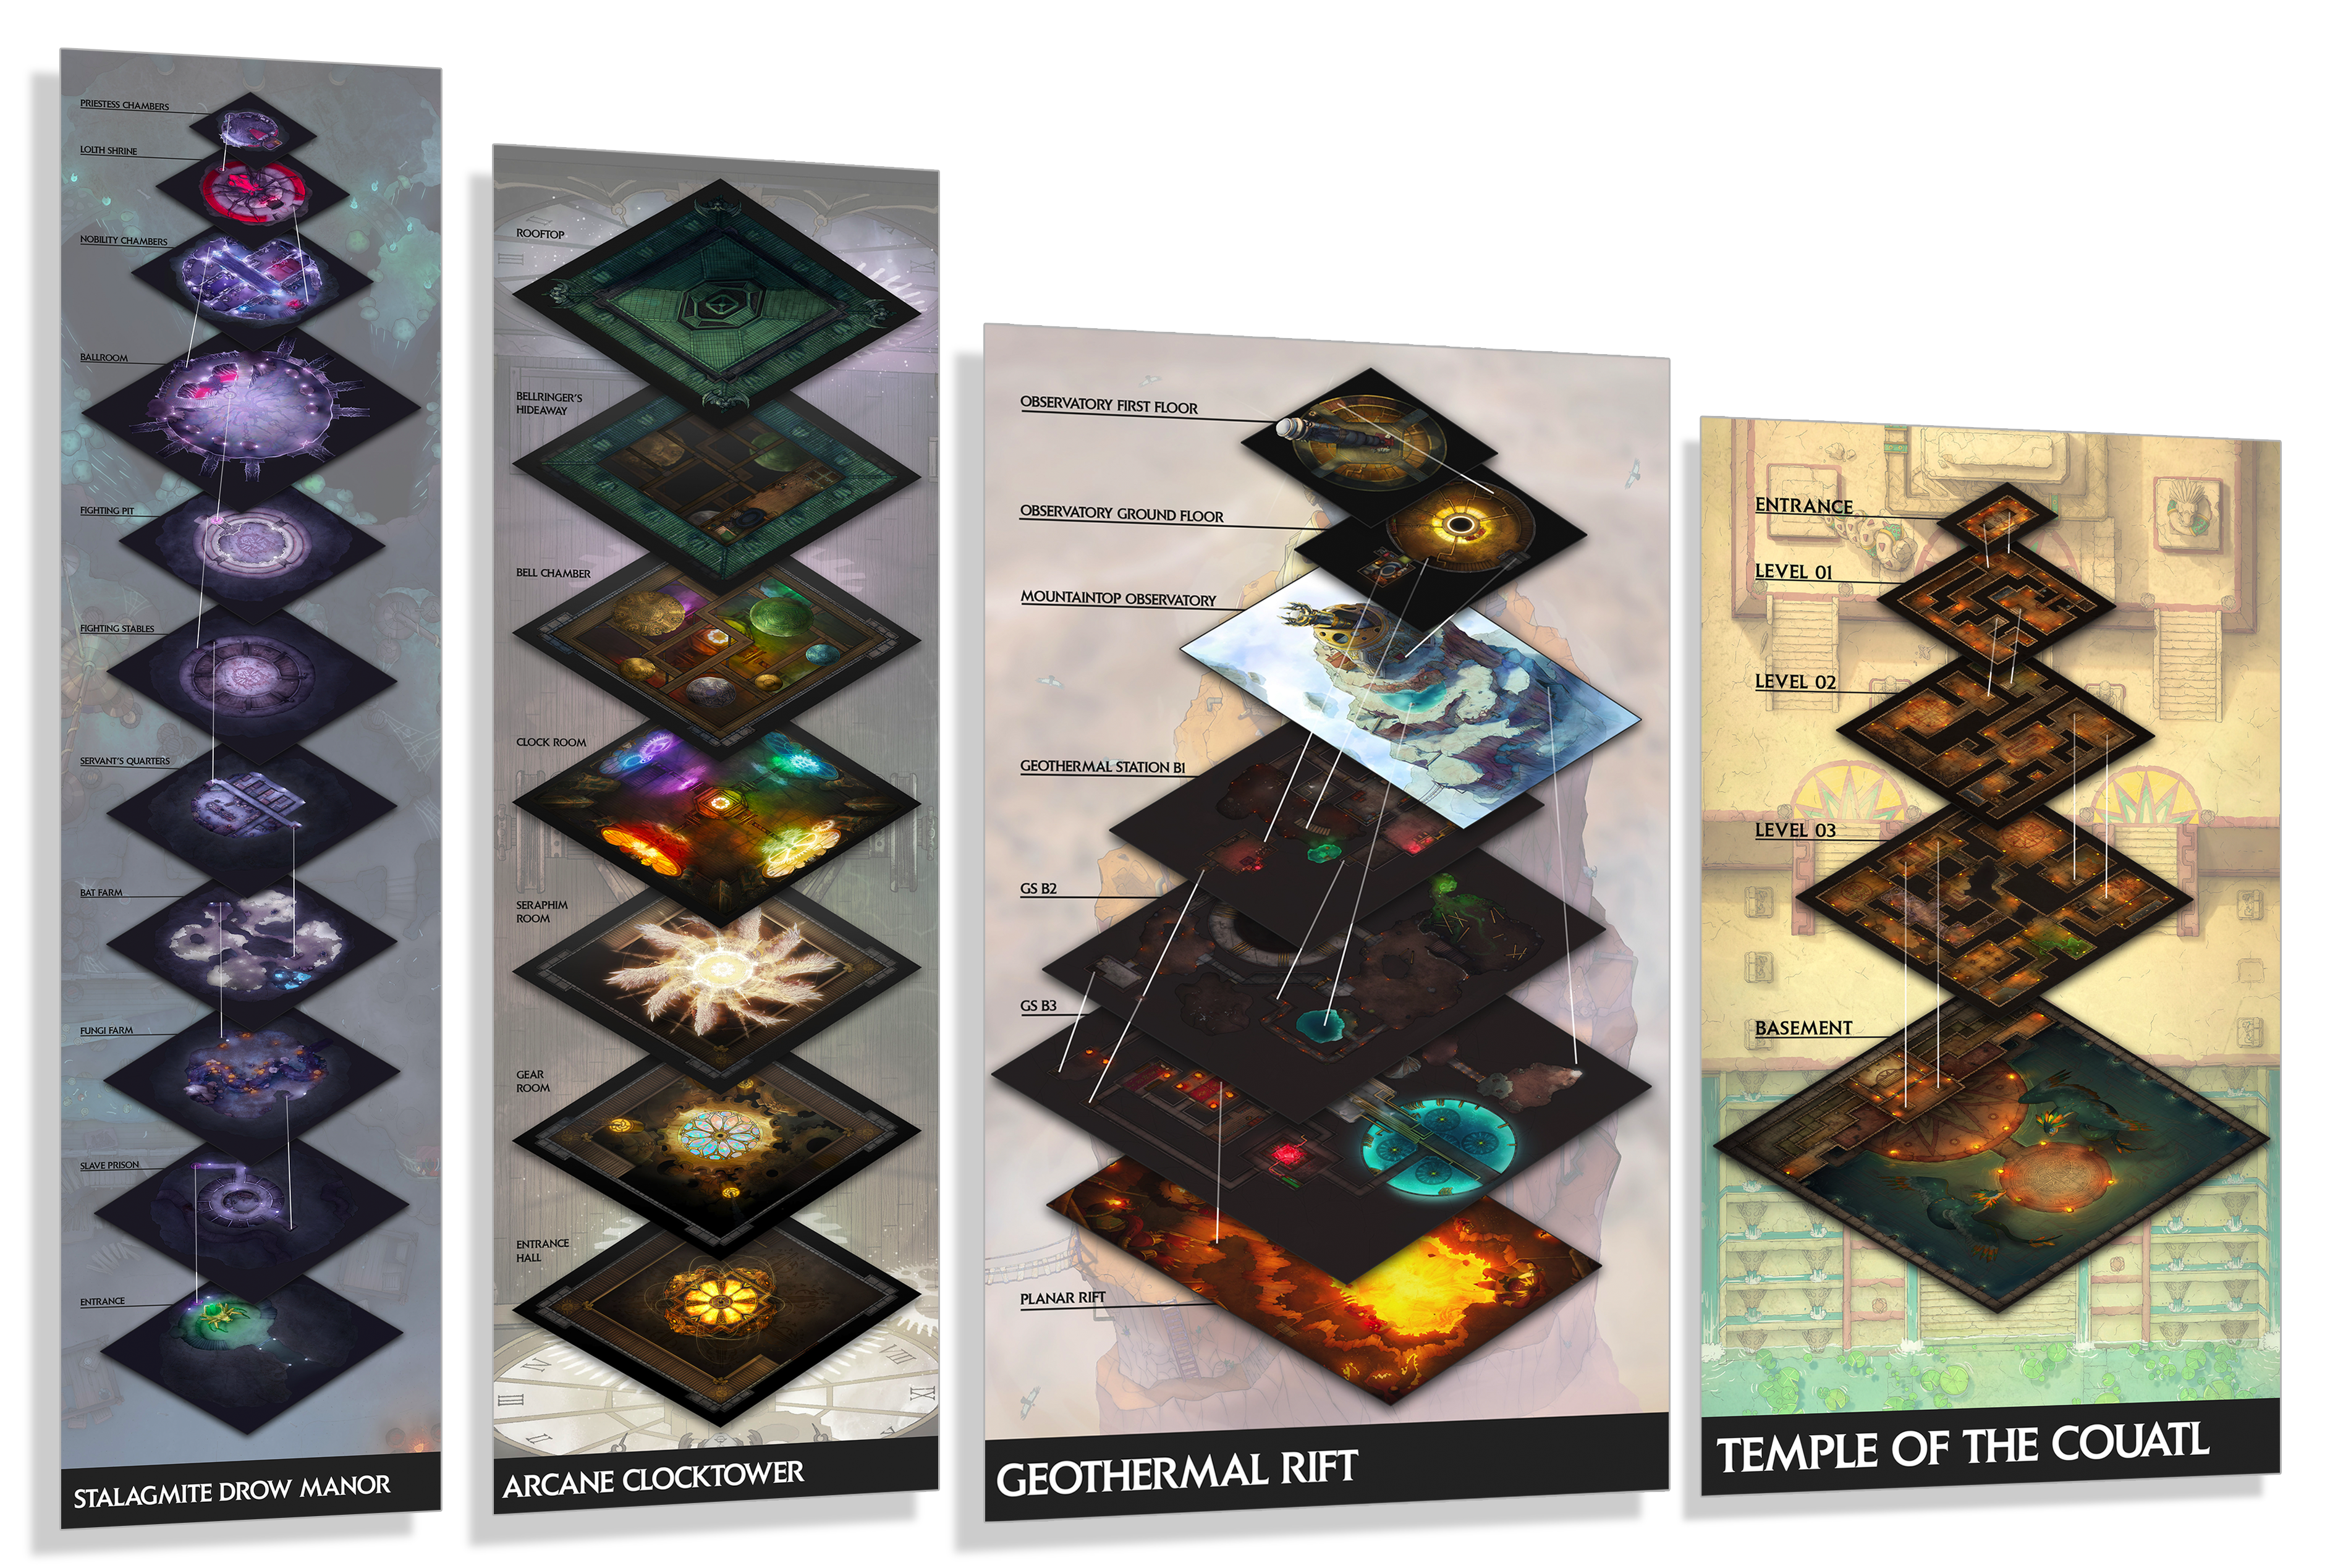 Maps layered on top of each other showing several multi-level dungeons